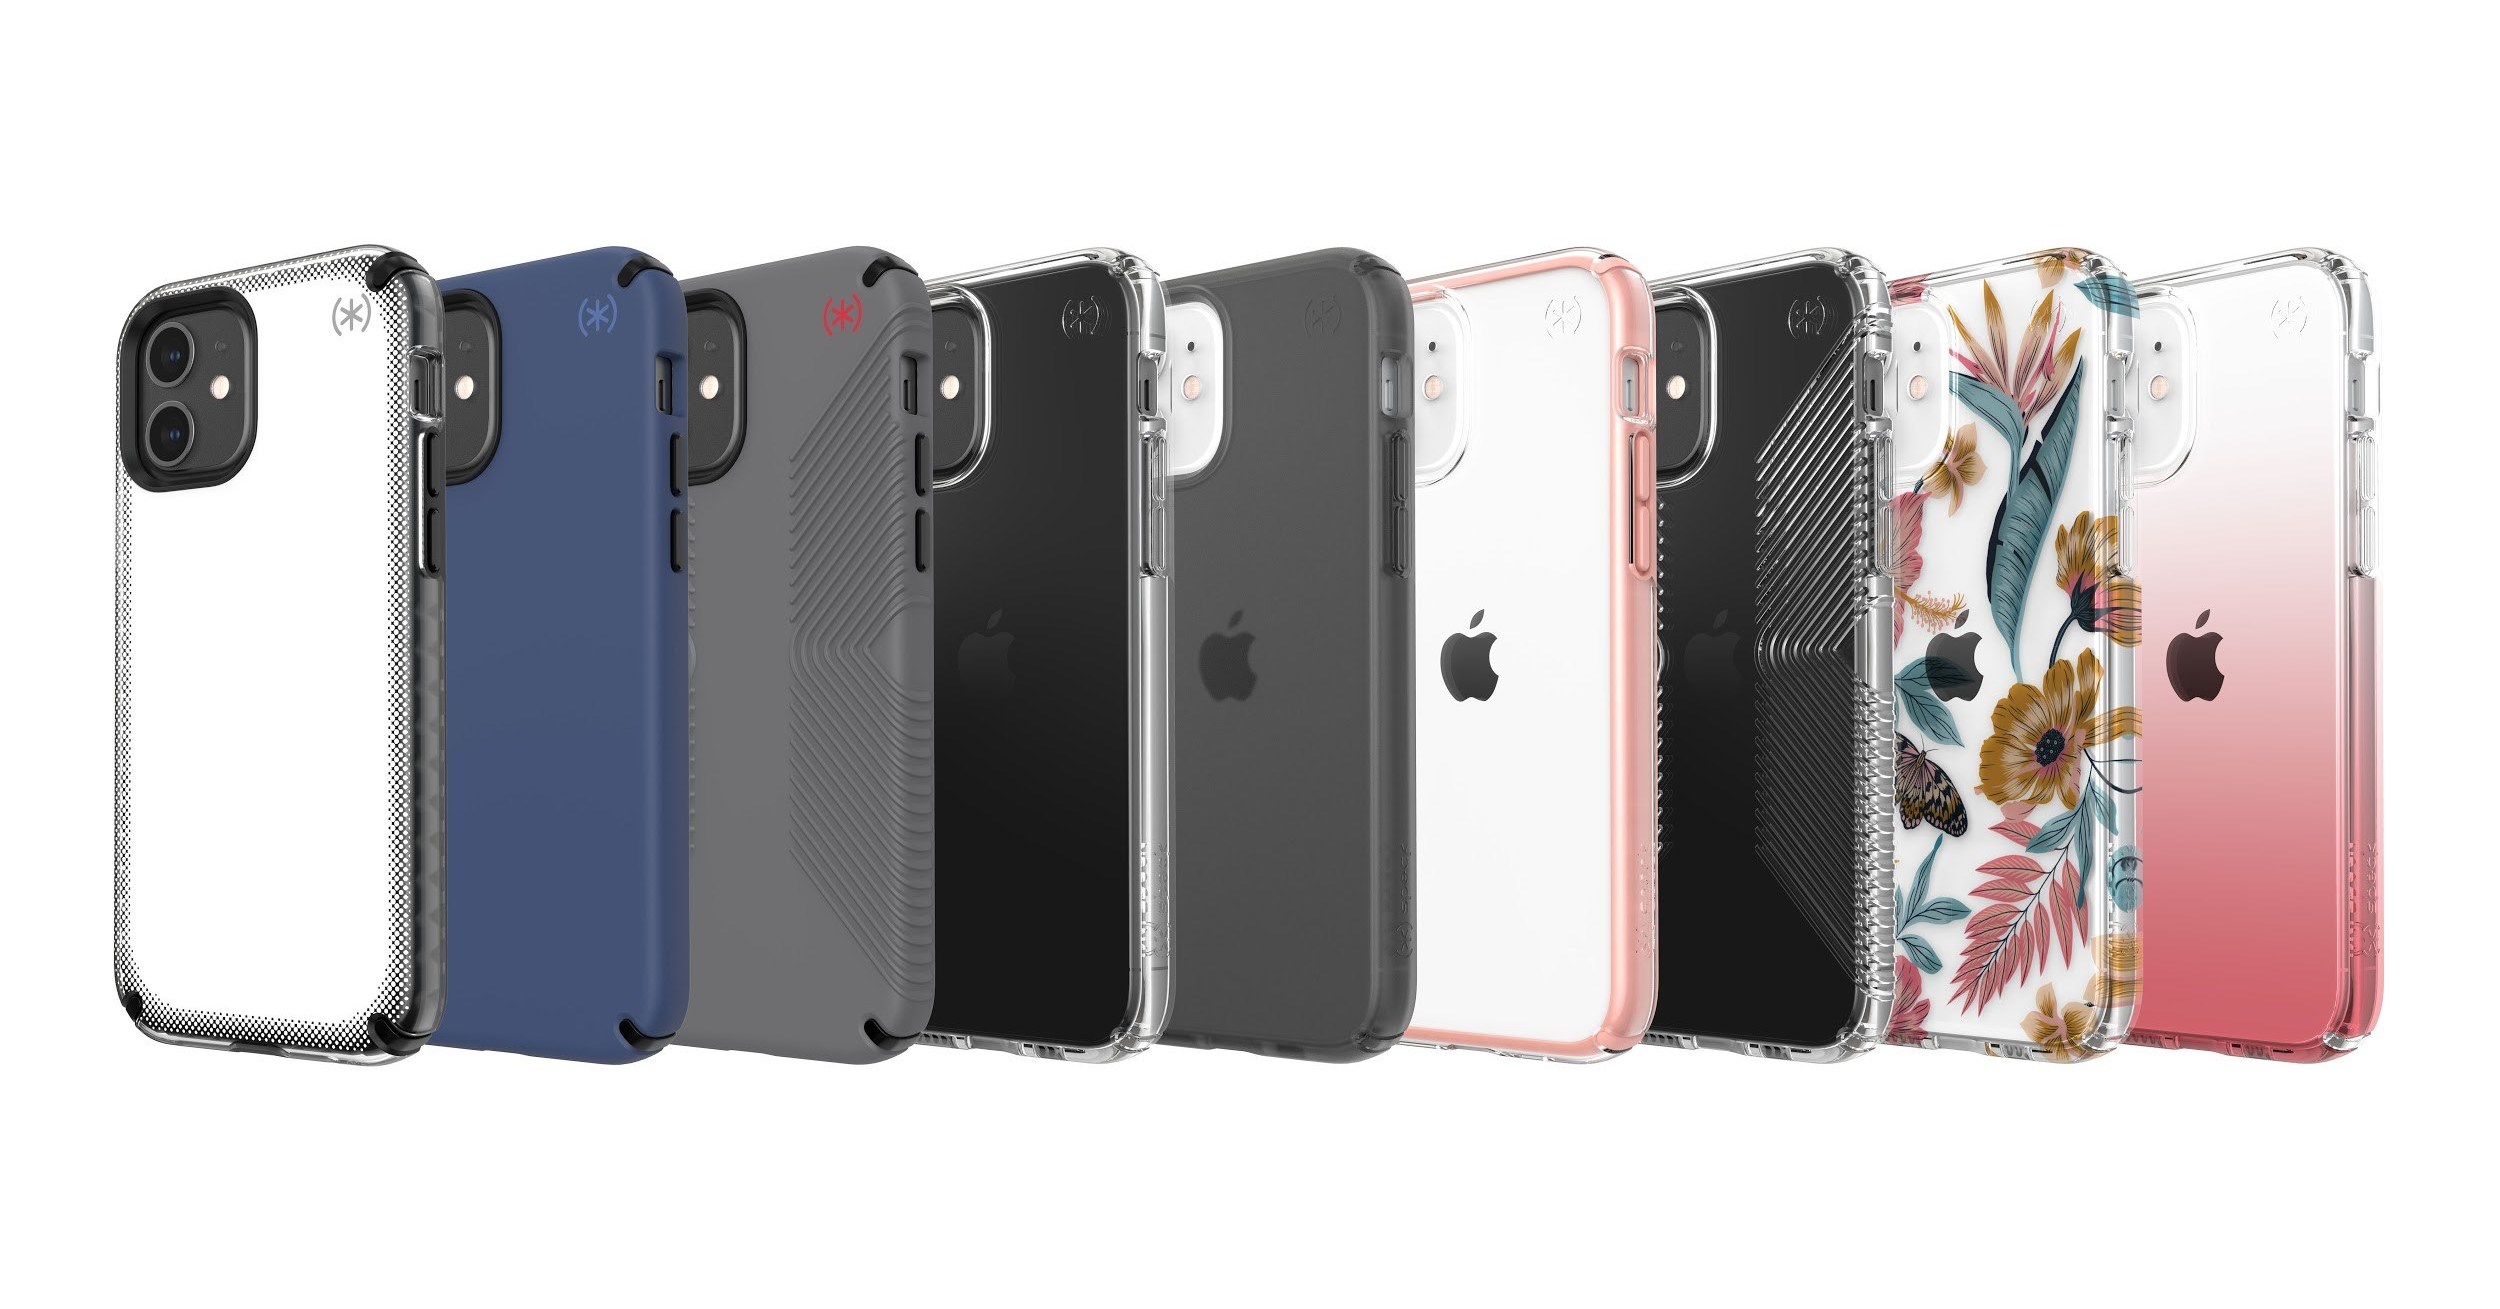 durable, and slim cases, with built-in antimicrobial protection, now availa...